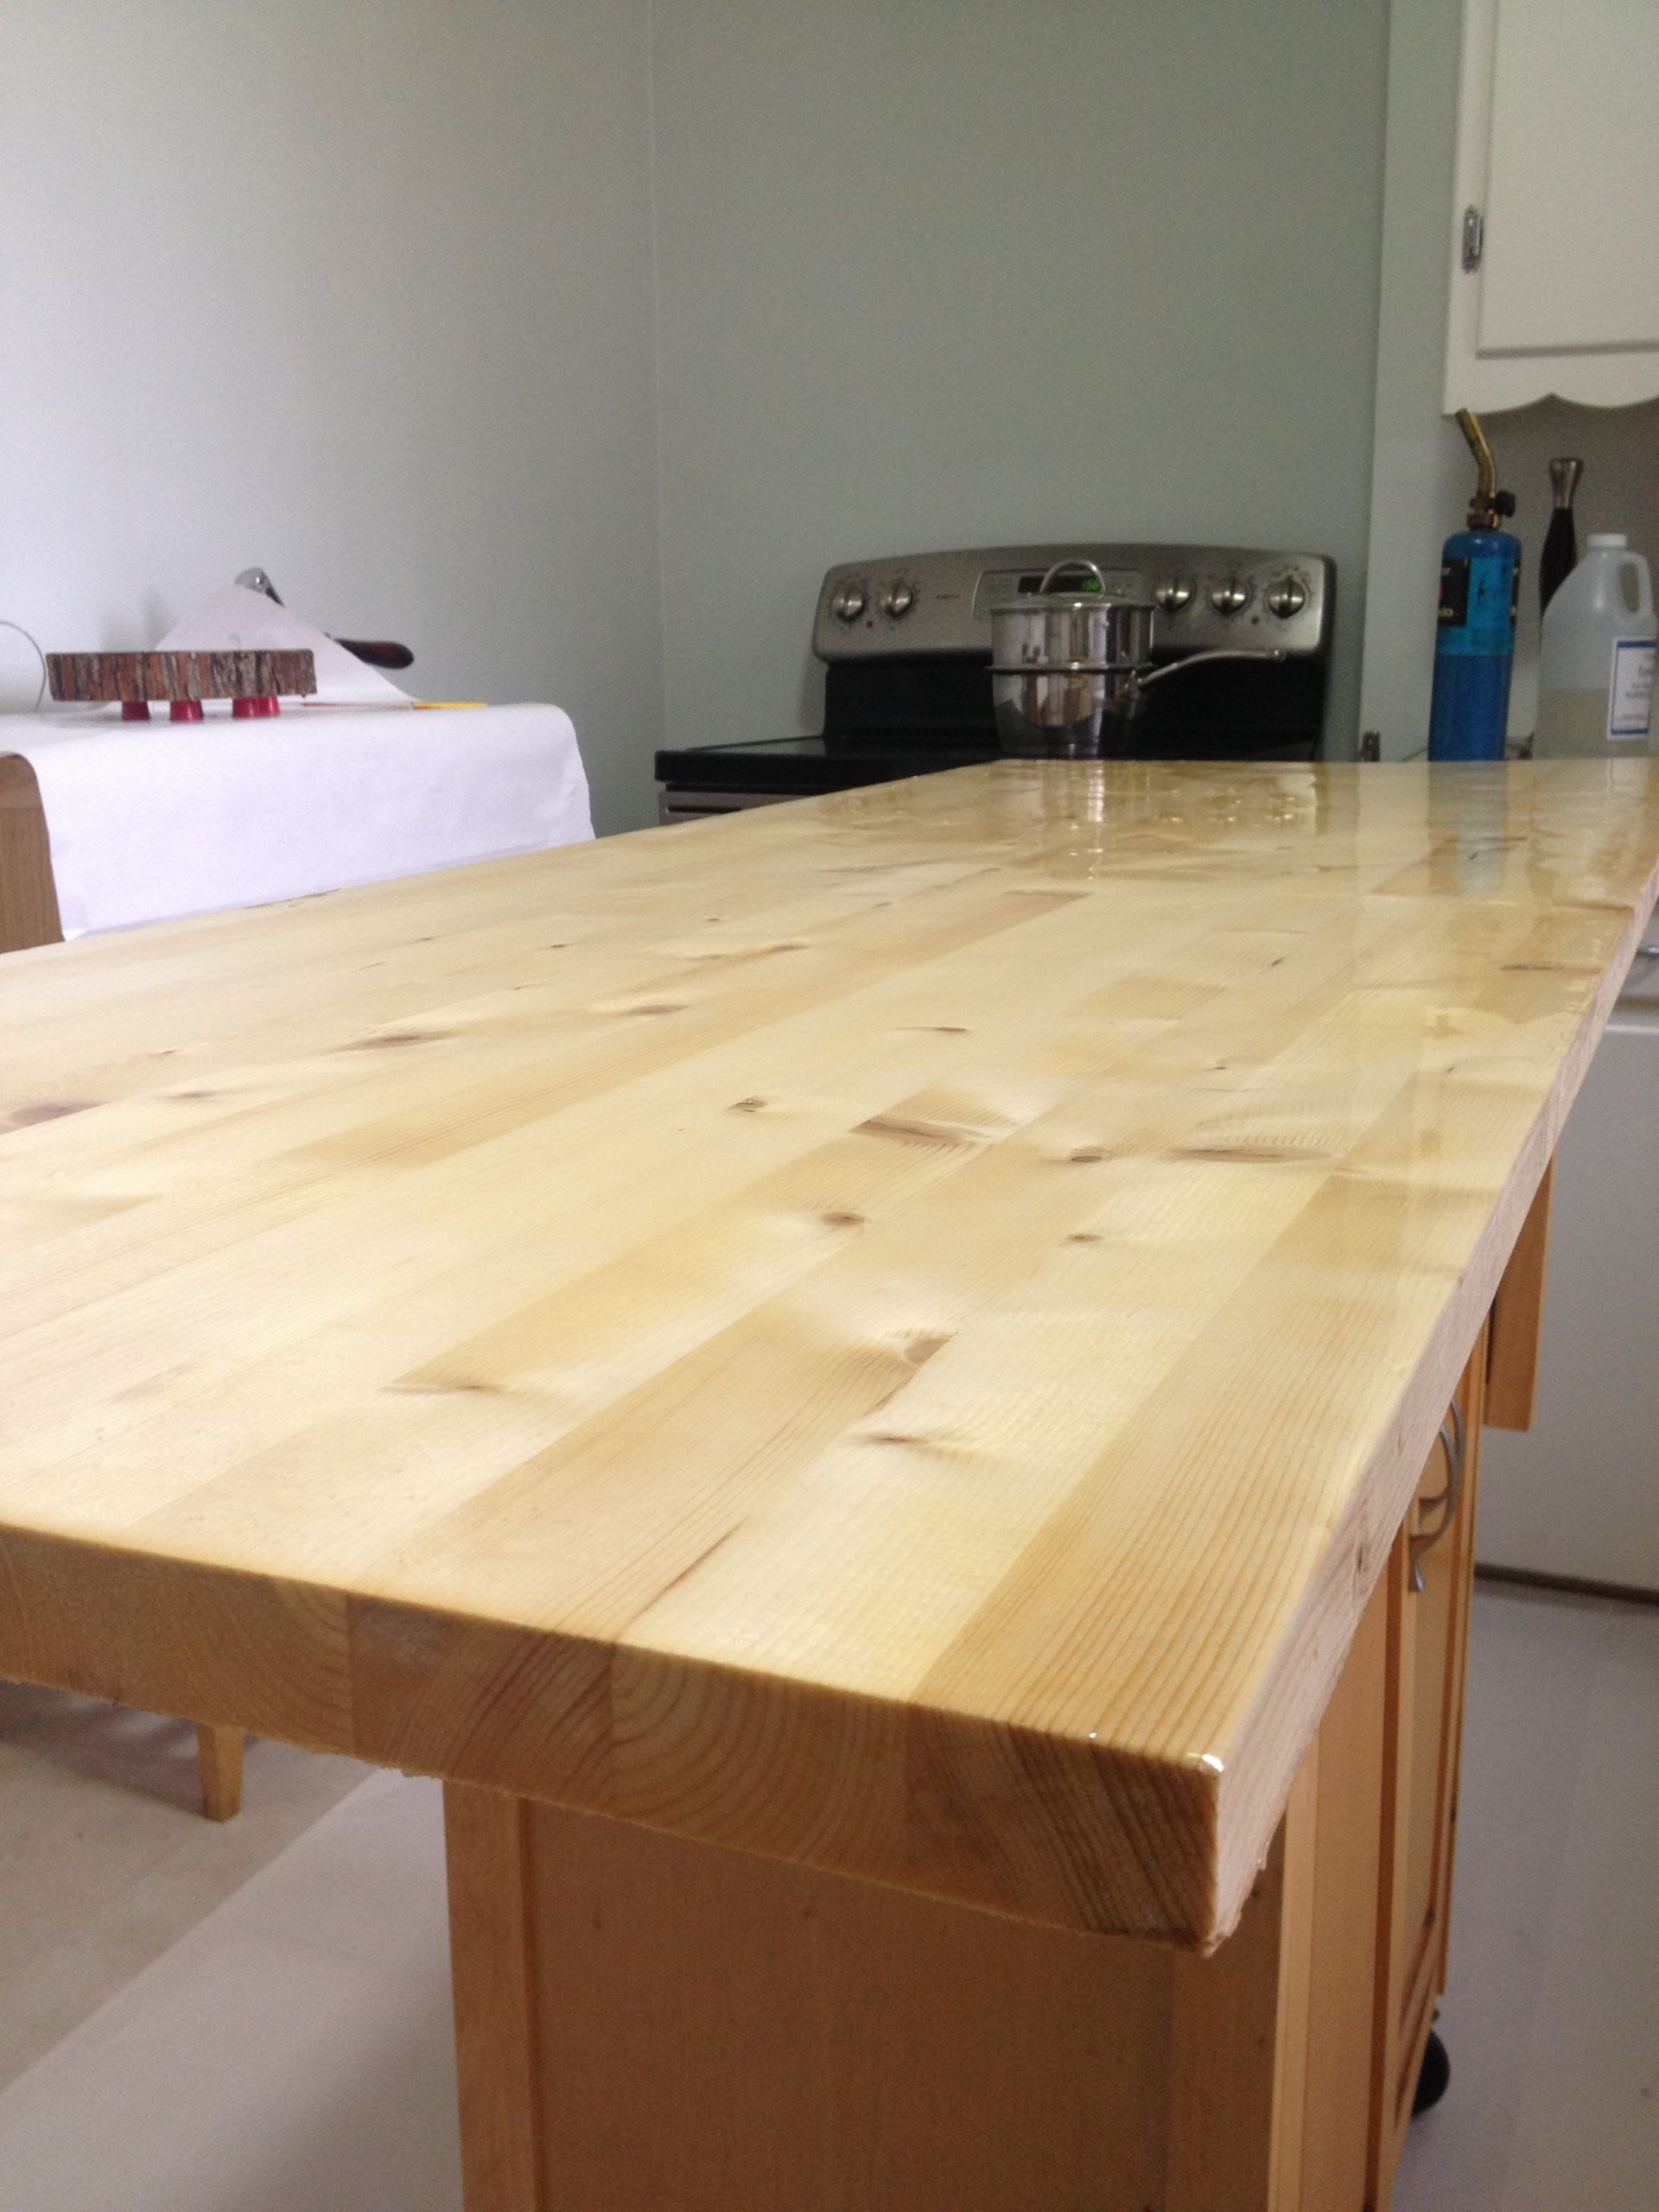 countertop epoxy butcher block
 Epoxy resin finish on a butcher block table top. in 2019 ..